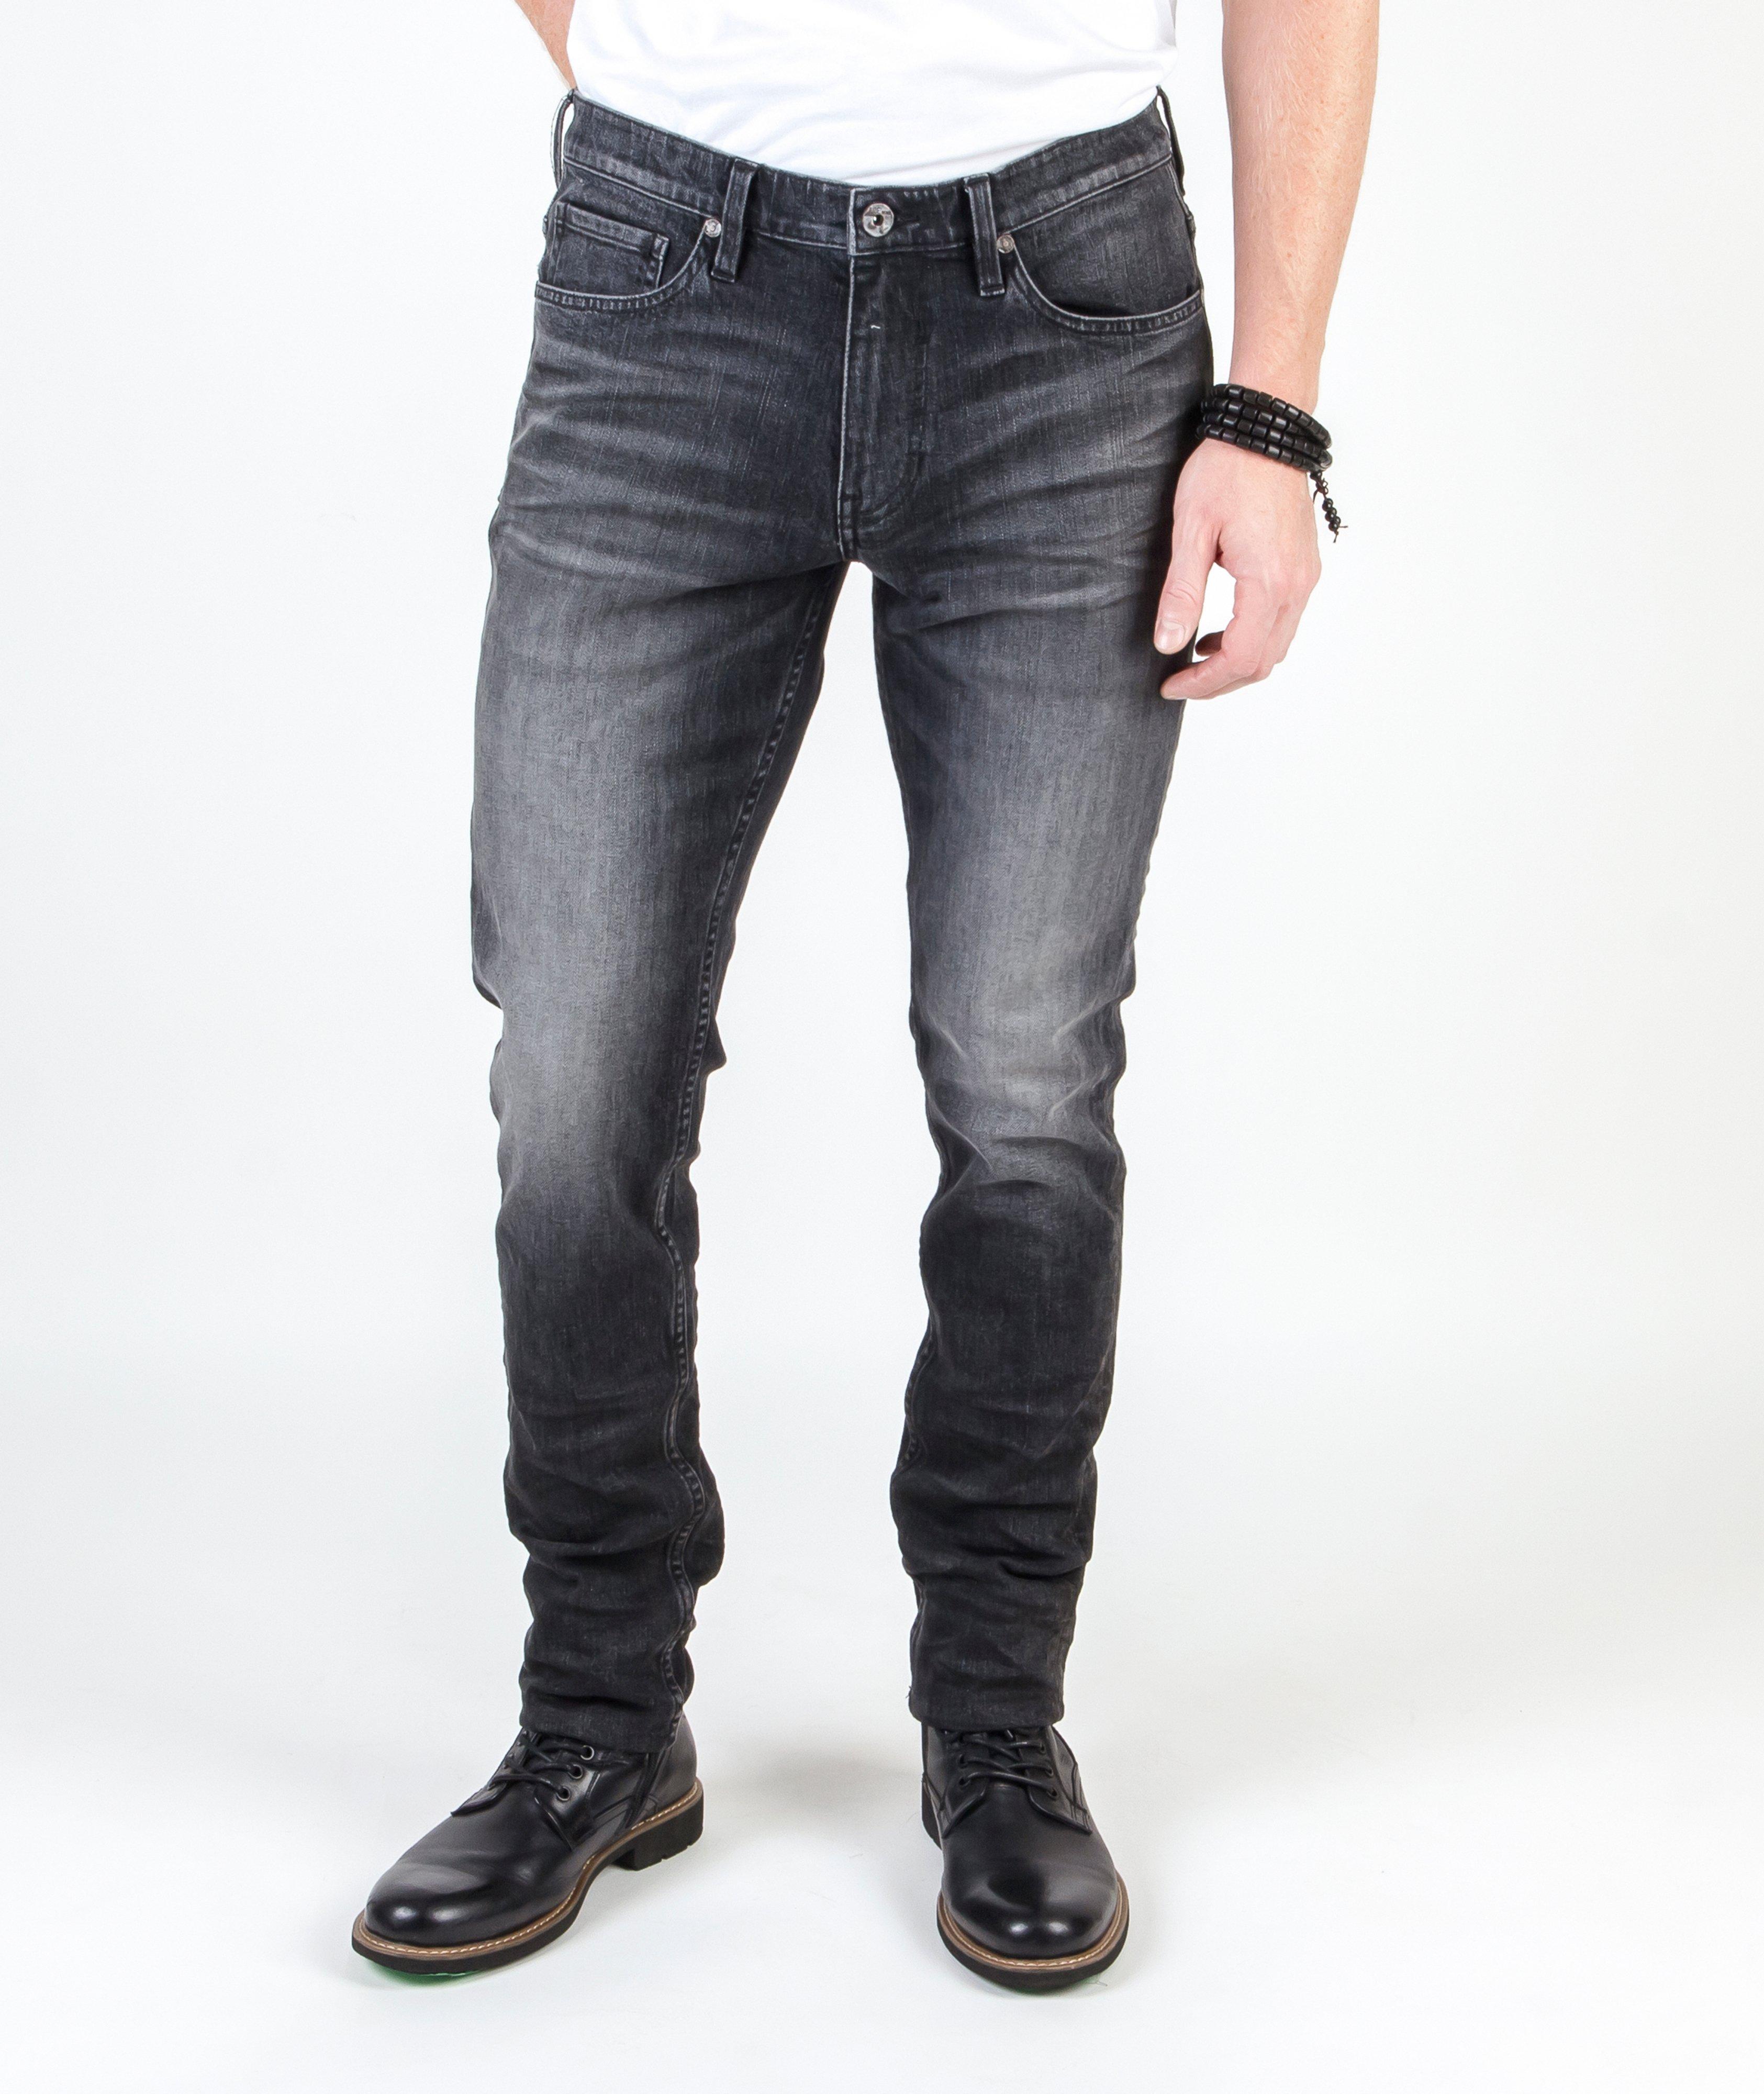 Blade Smoke Slim Tapered Fit Jeans image 1